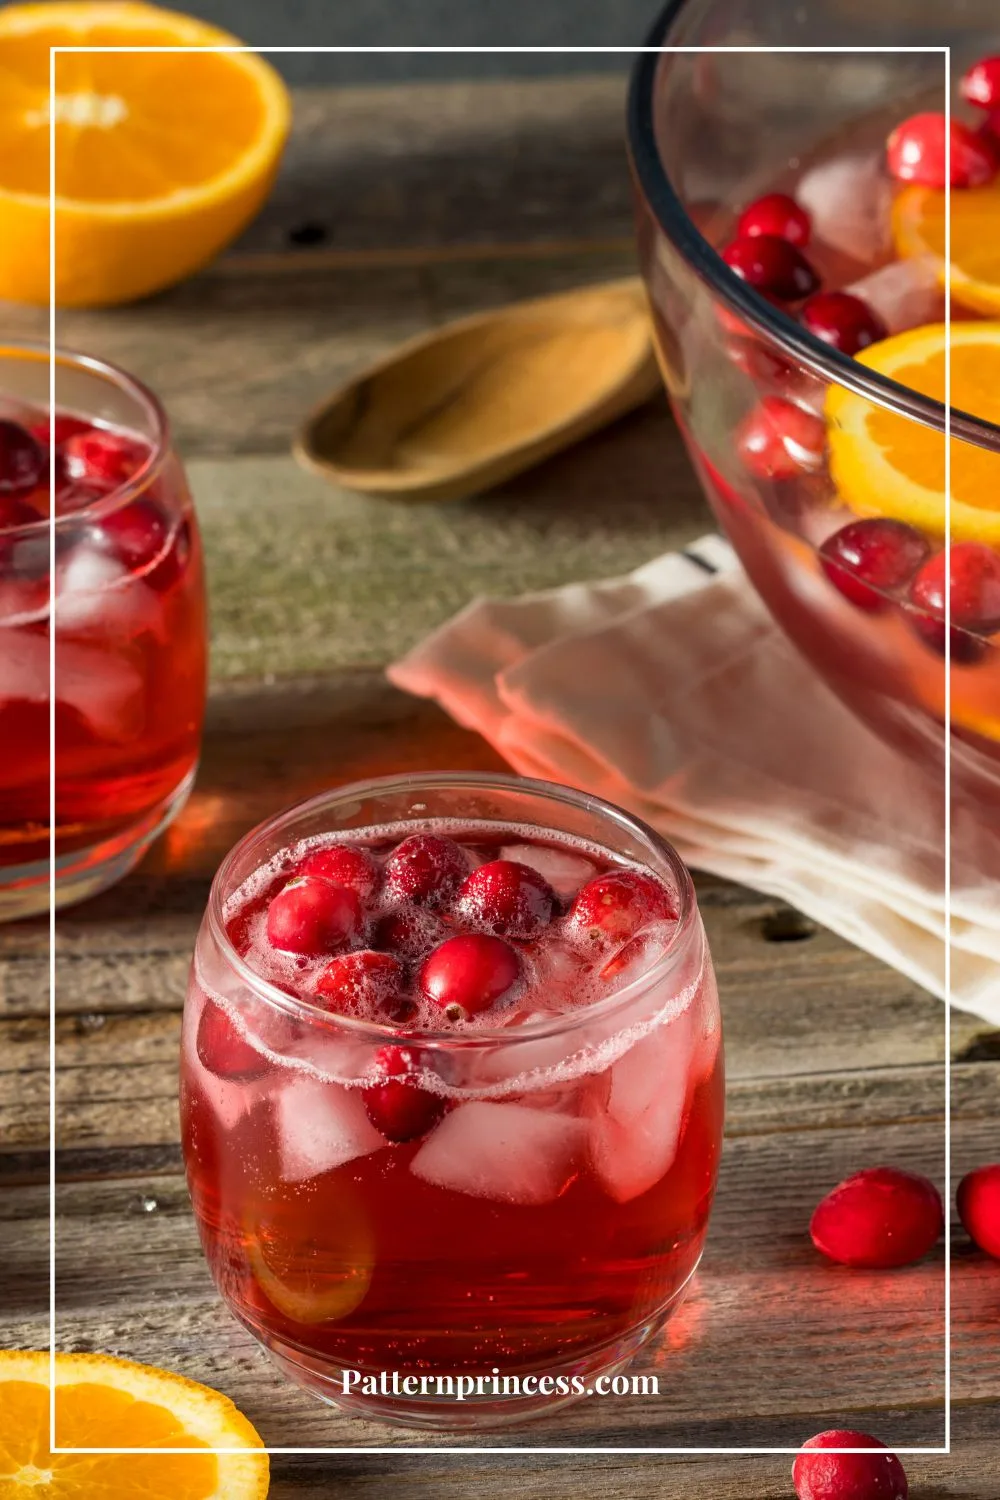 Punch garnished with orange slices and whole cranberries